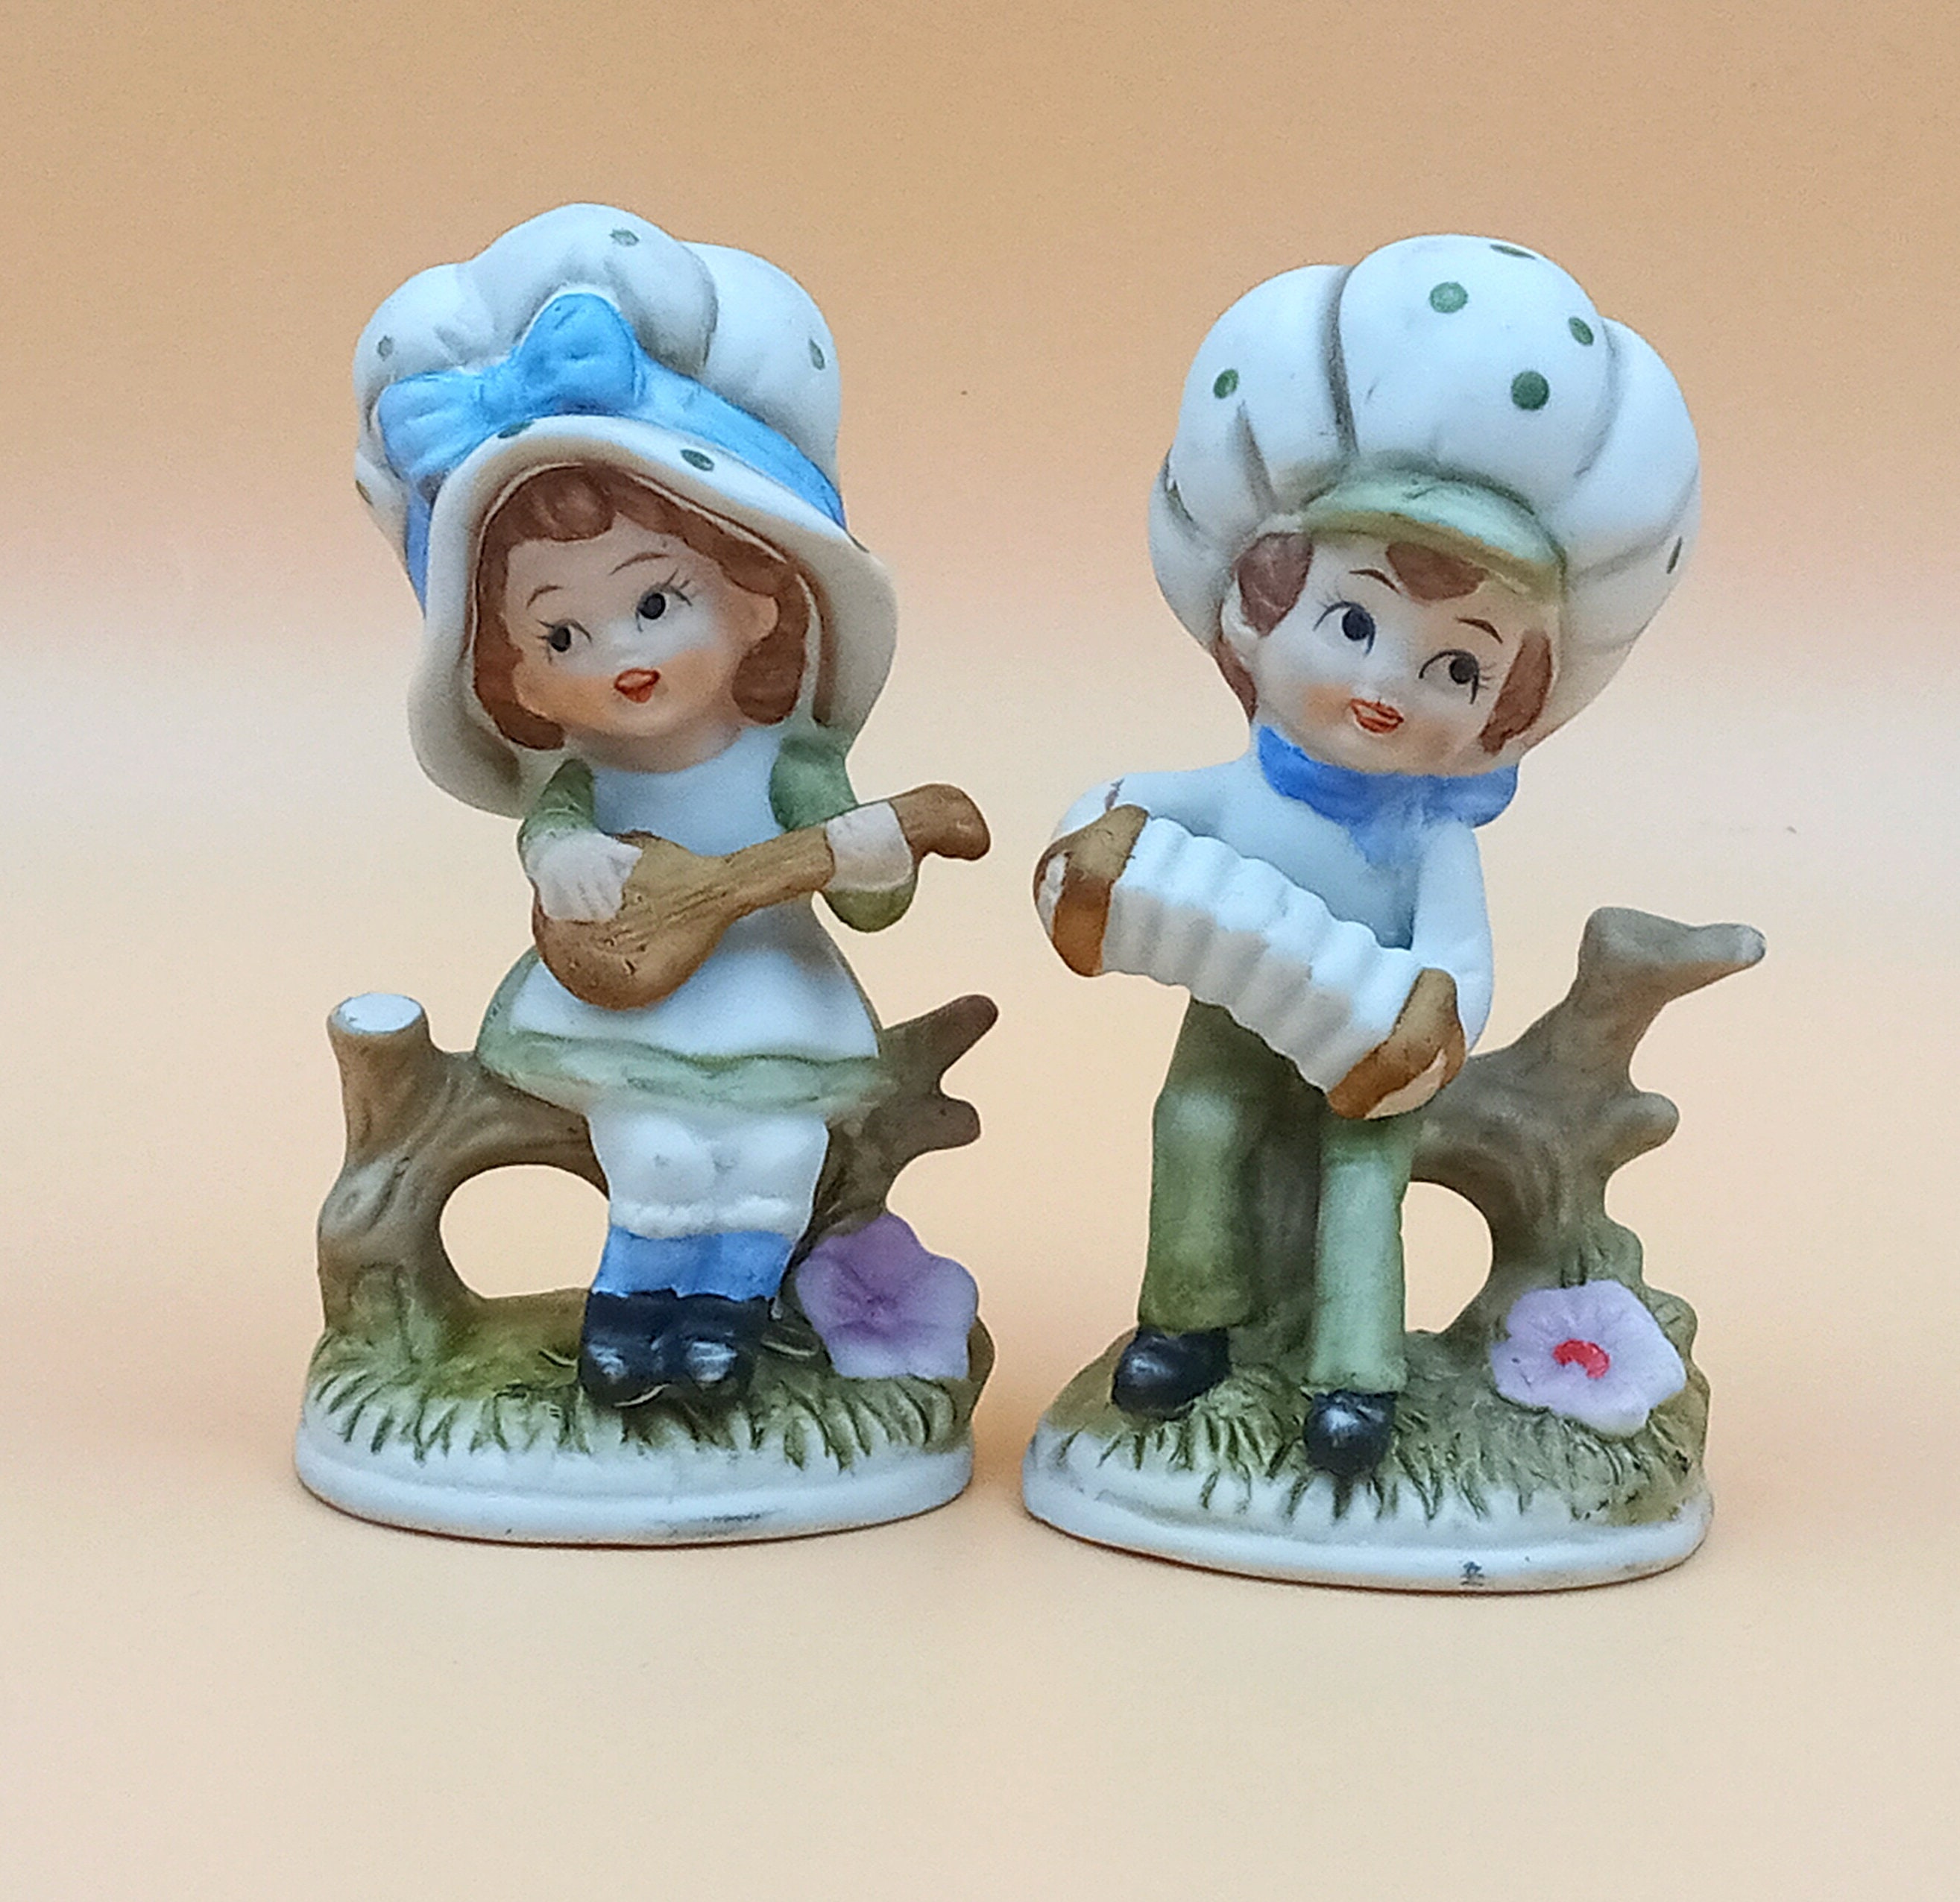 Couple of Vintage Ceramic FIGURINES, Boy and Girl, Biscuit, Musician -   Canada